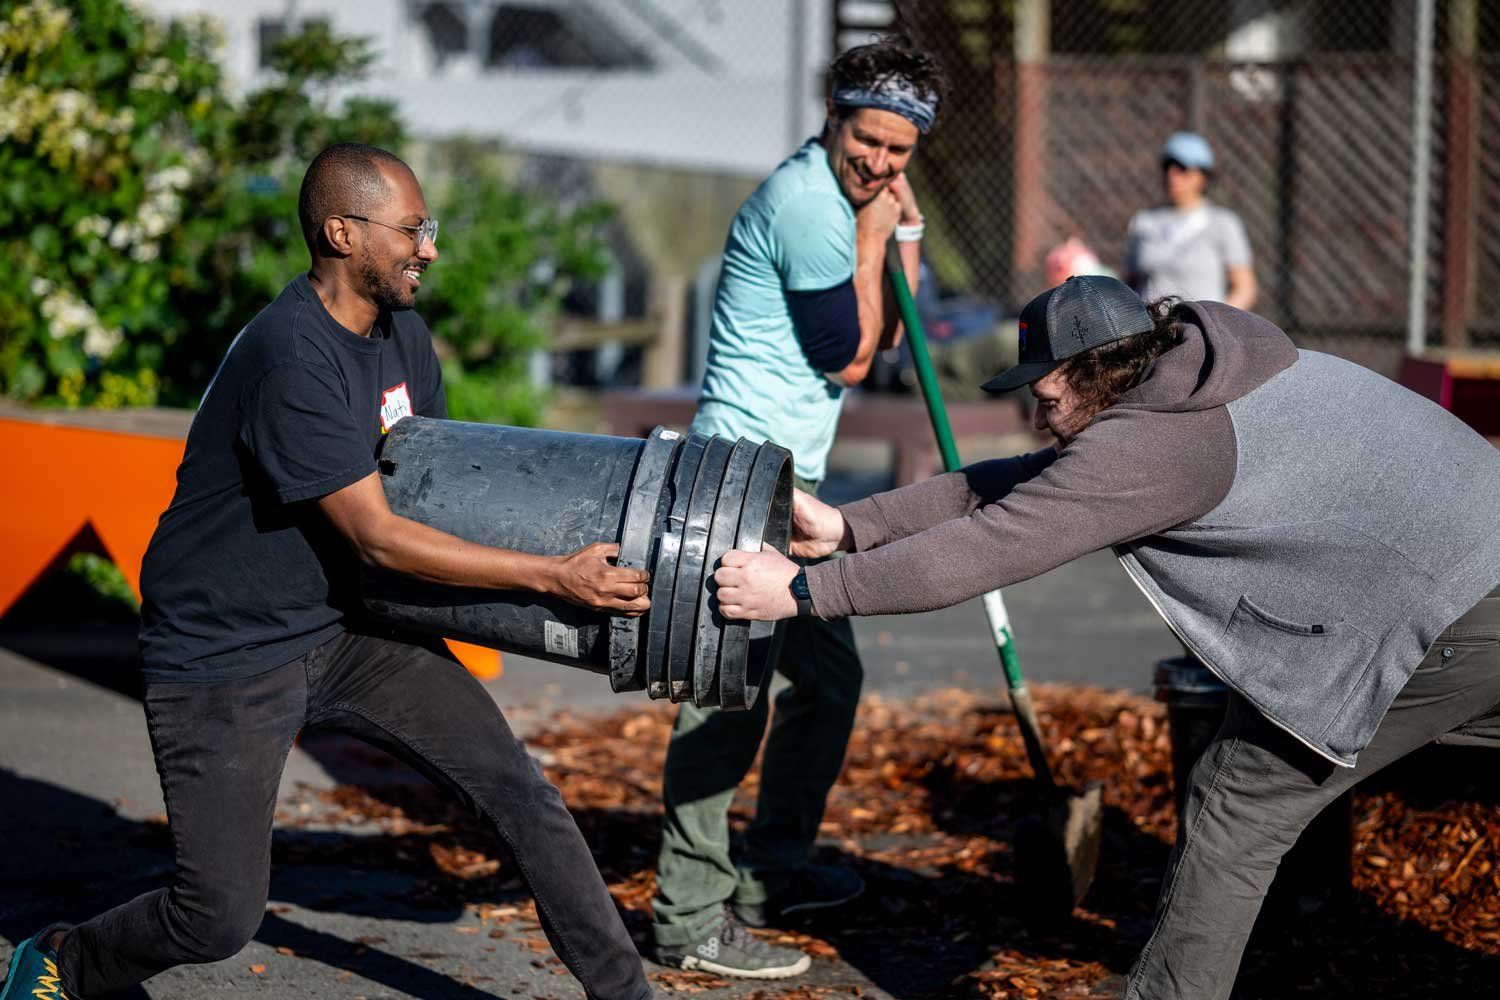 Two men smile as they try to pull stuck buckets together during a tree-planting event.